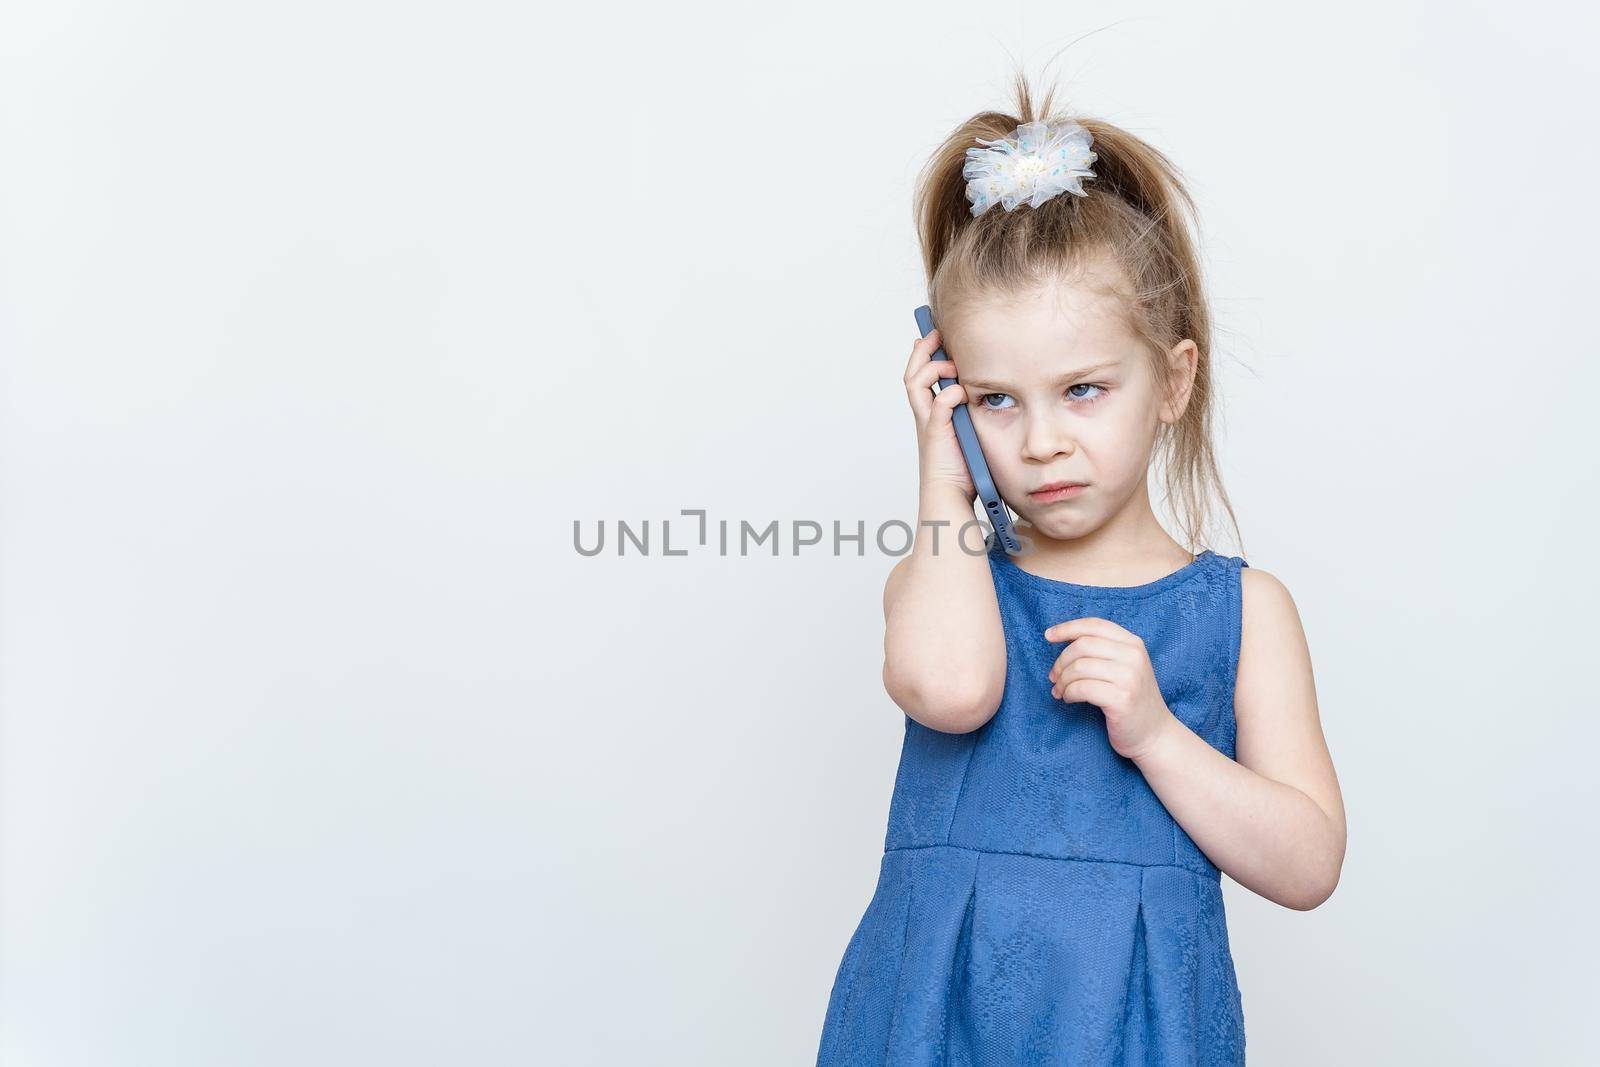 emotional 5-6 year old girl in a blue dress posing in the studio with a smartphone